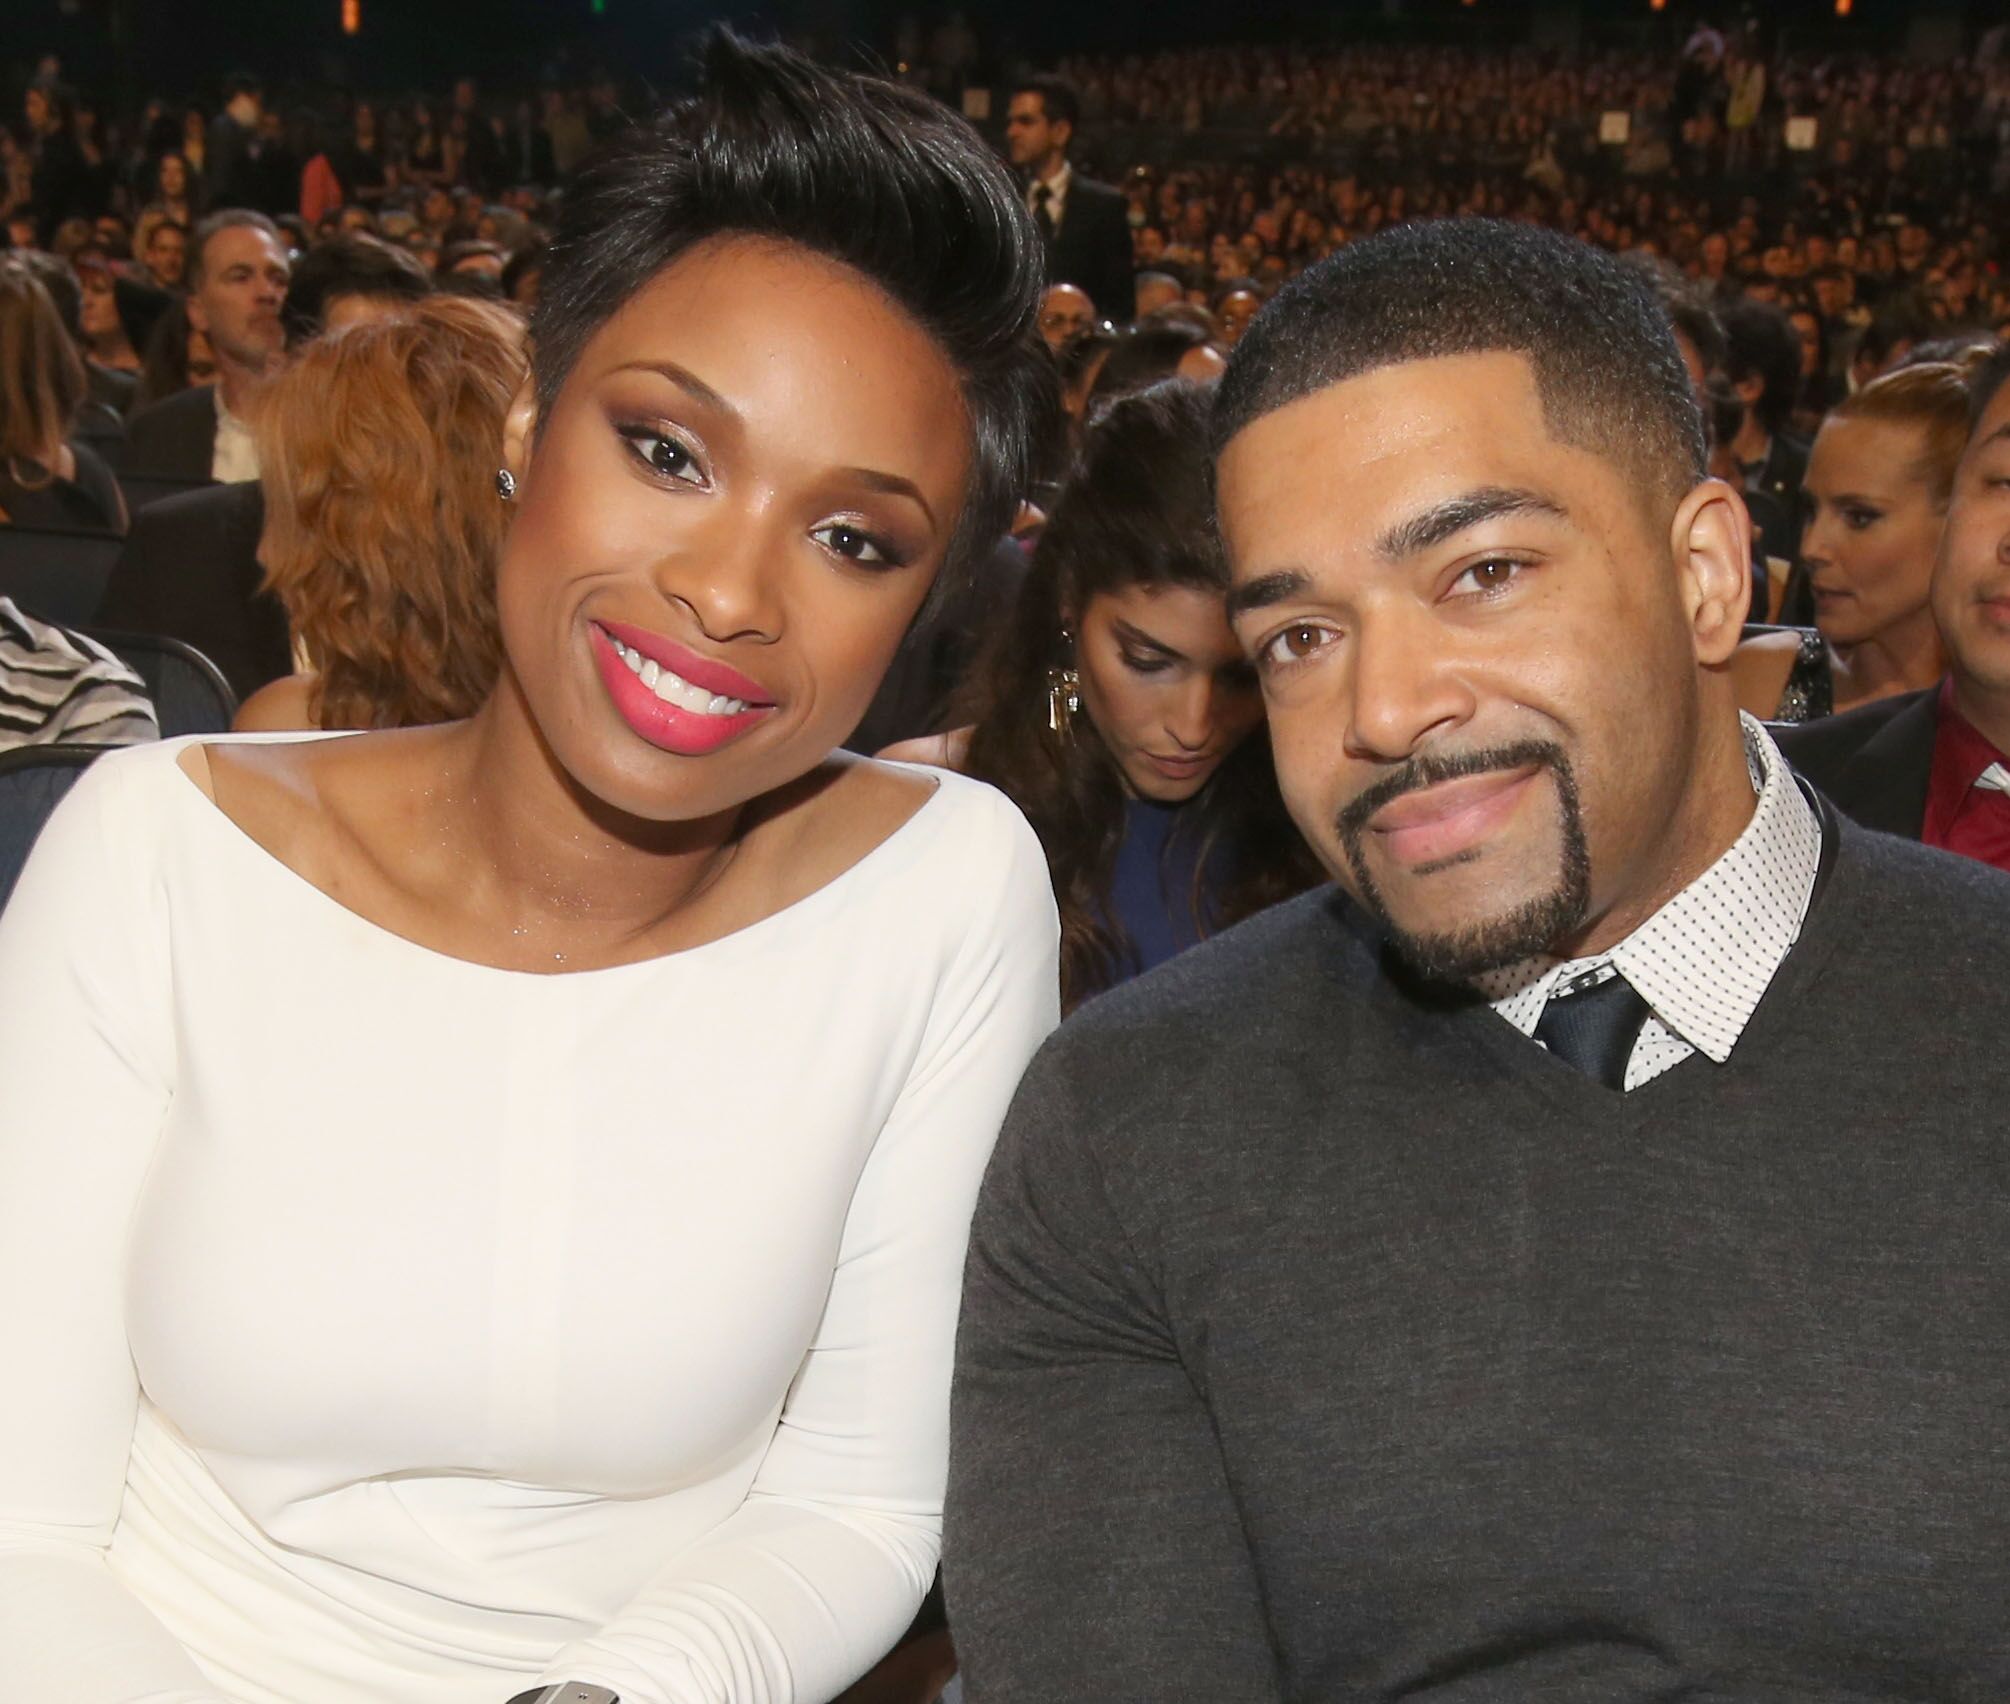 Jennifer Hudson (L) and David Otunga attend The 40th Annual People's Choice Awards at Nokia Theatre L.A. Live on January 8, 2014 | Photo: Getty Images